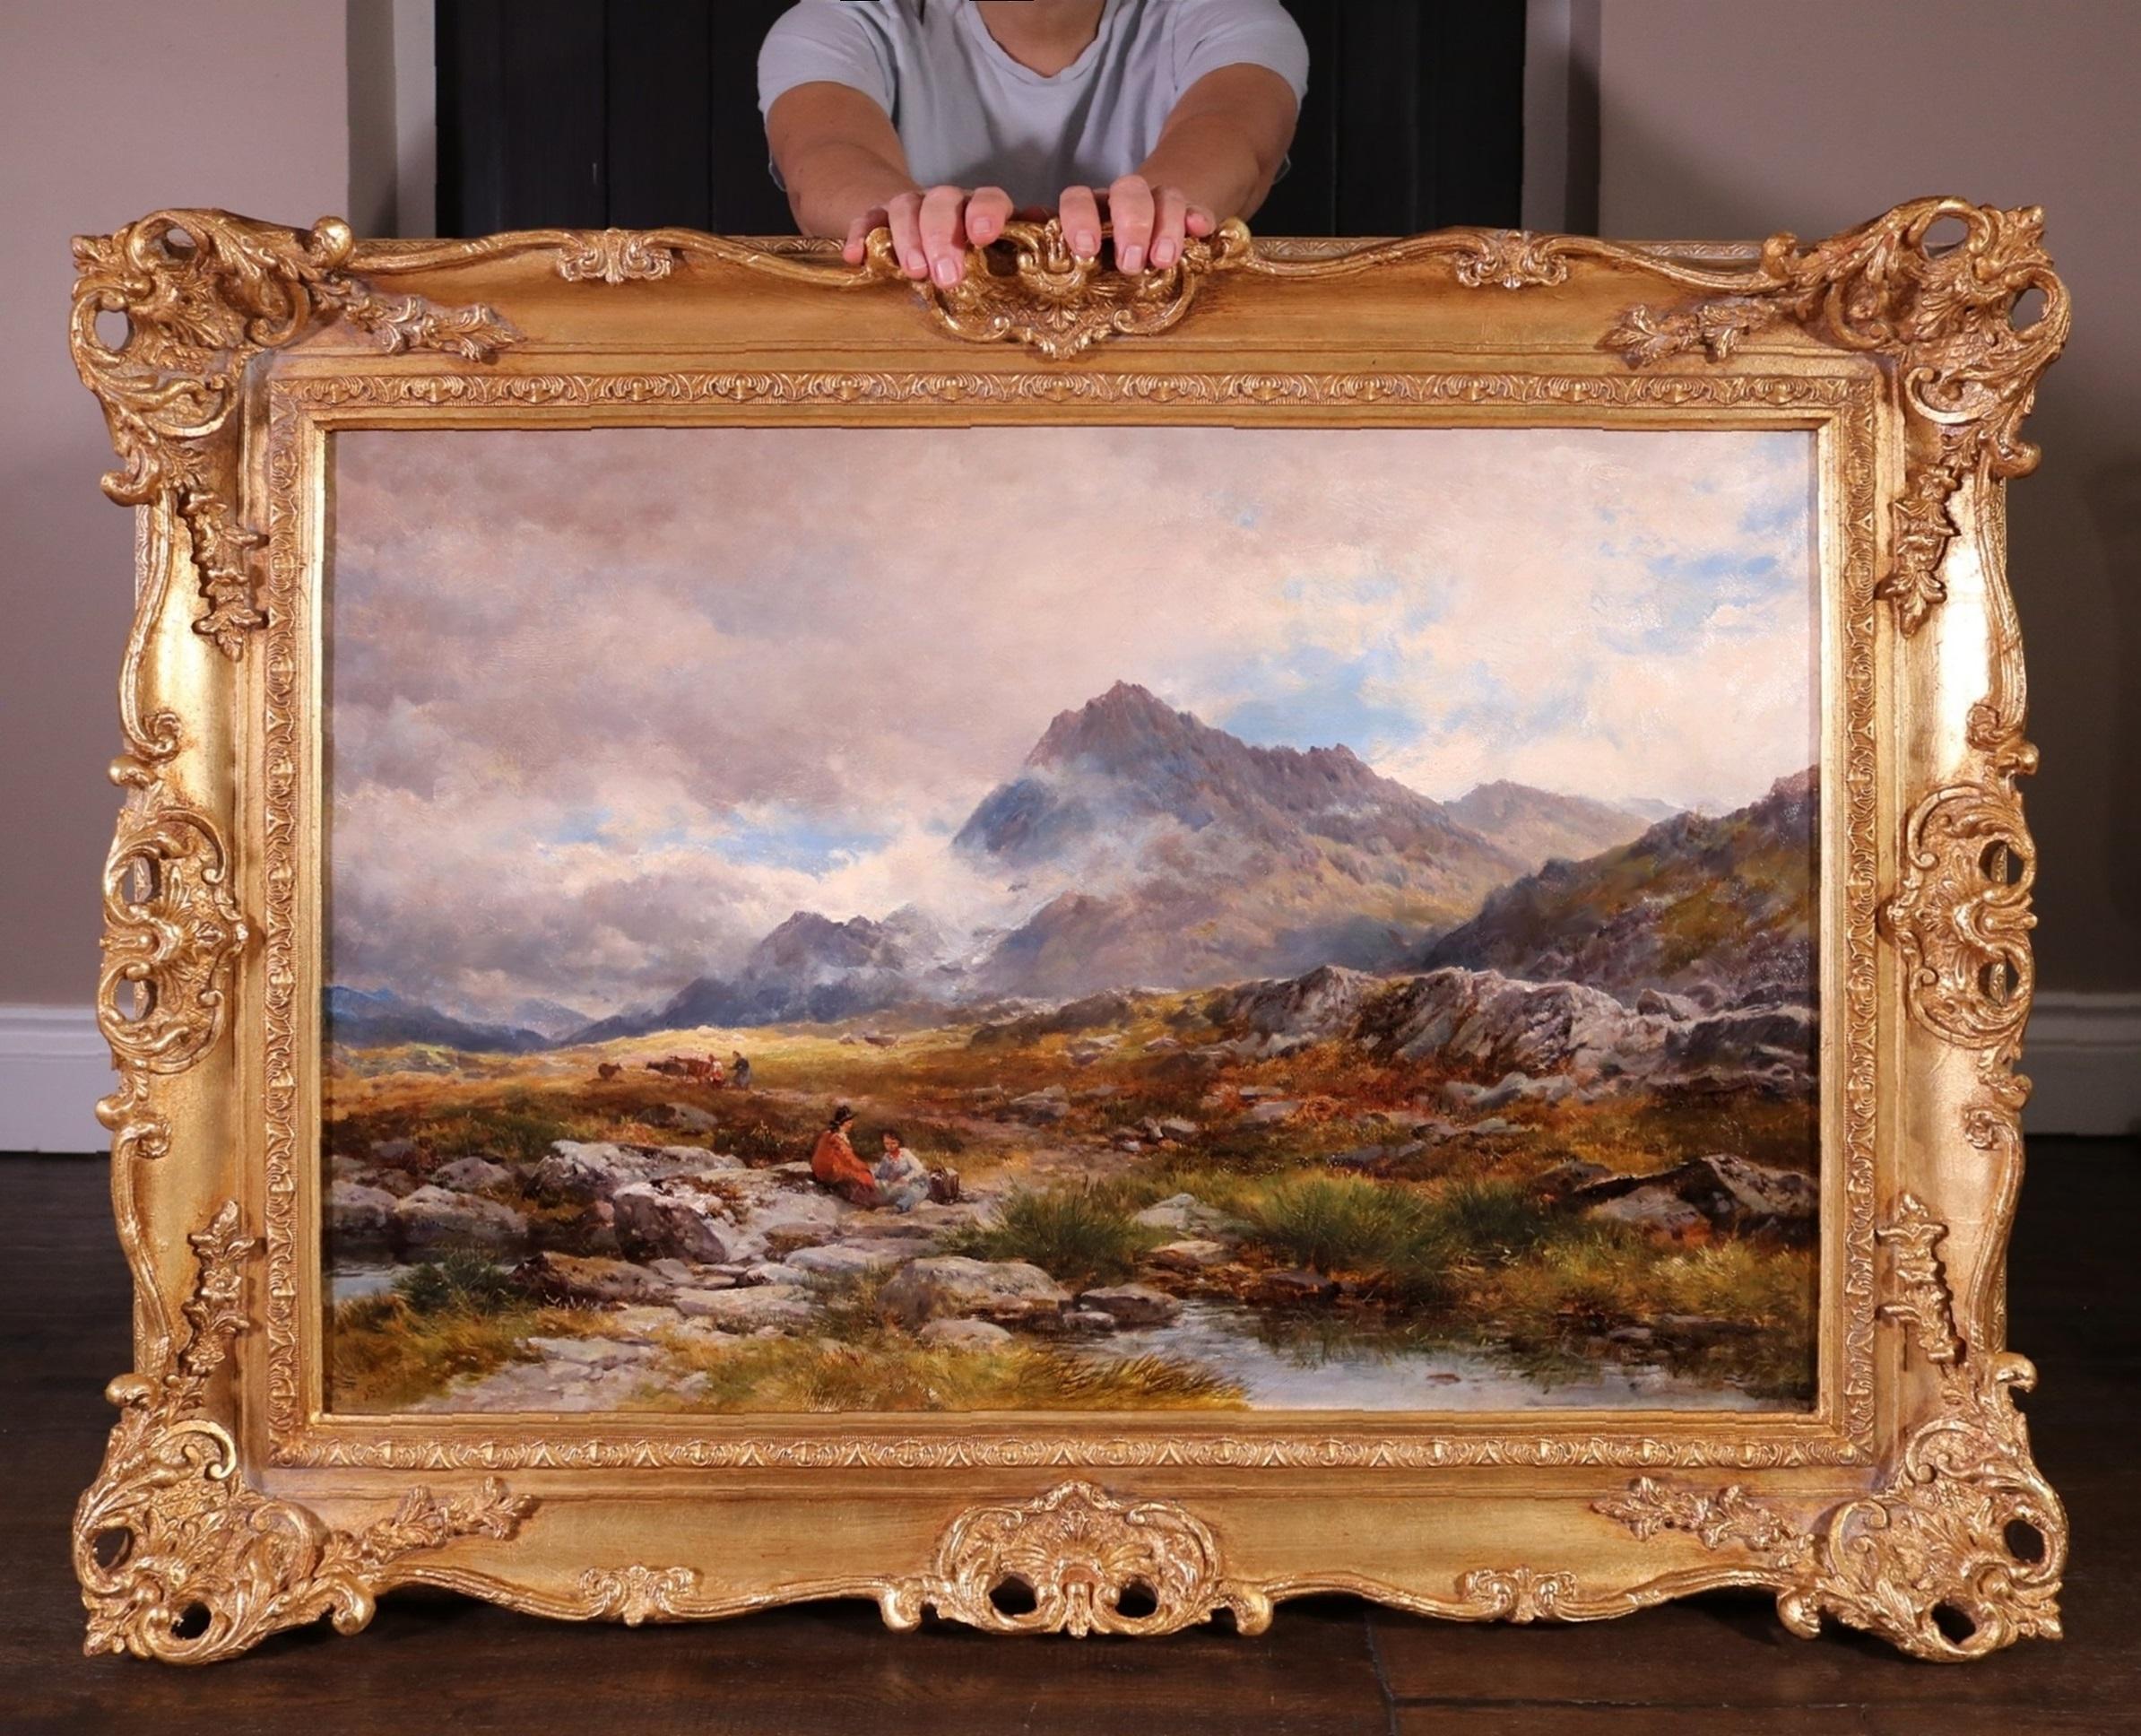 John Syer Figurative Painting - Before Glyder Fawr - Large 19th Century Oil Painting Welsh Mountain Landscape 